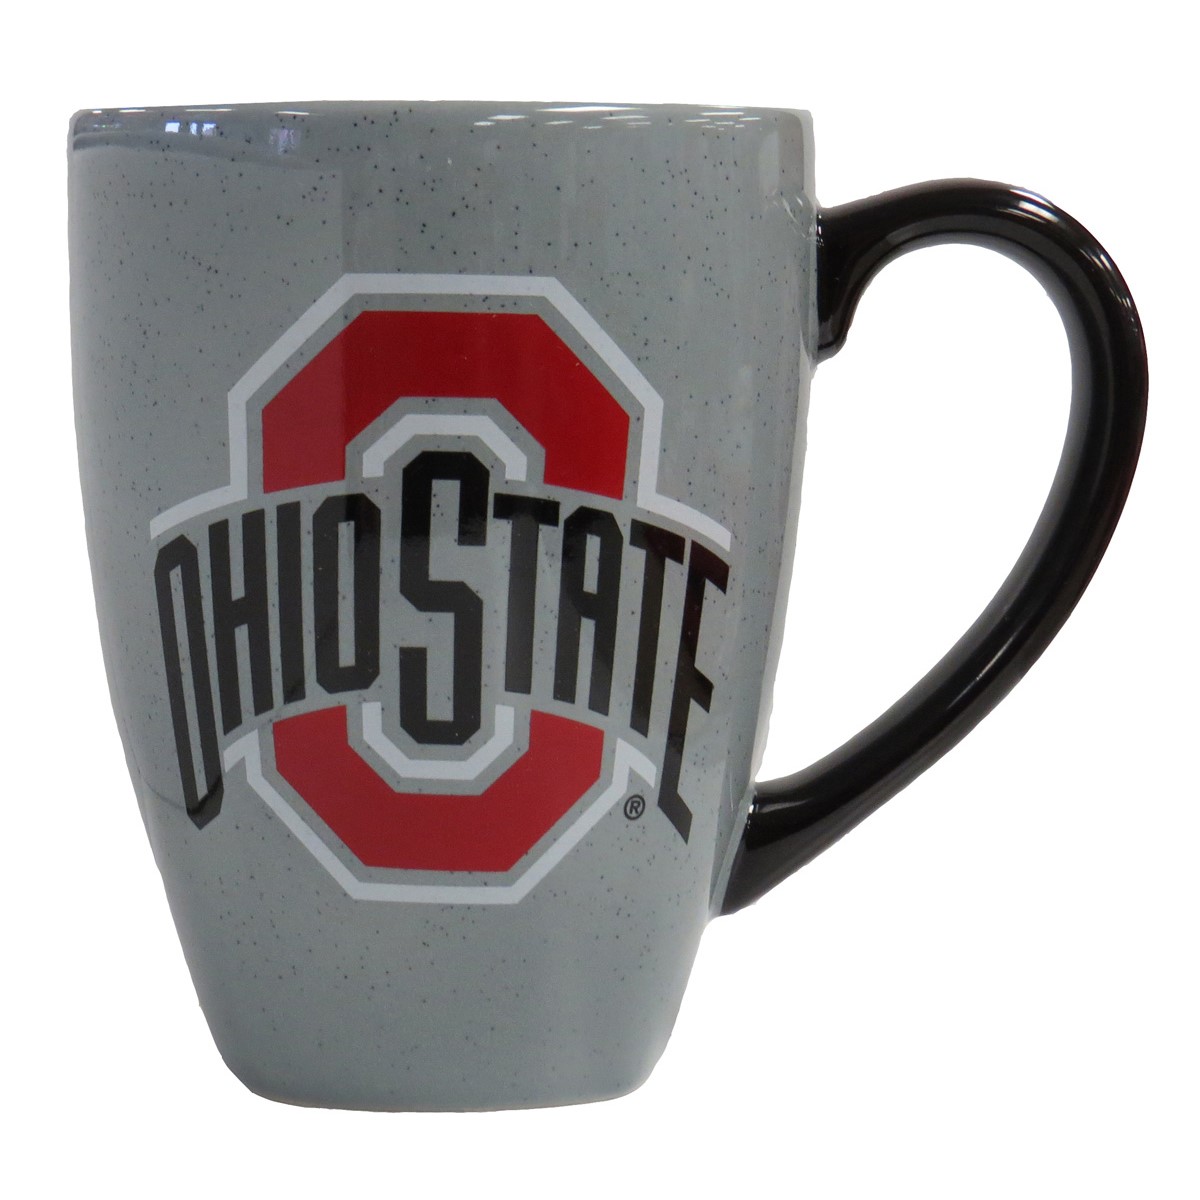 Ohio State mugs, cups and tumblers College Traditions Columbus (614)291-4678